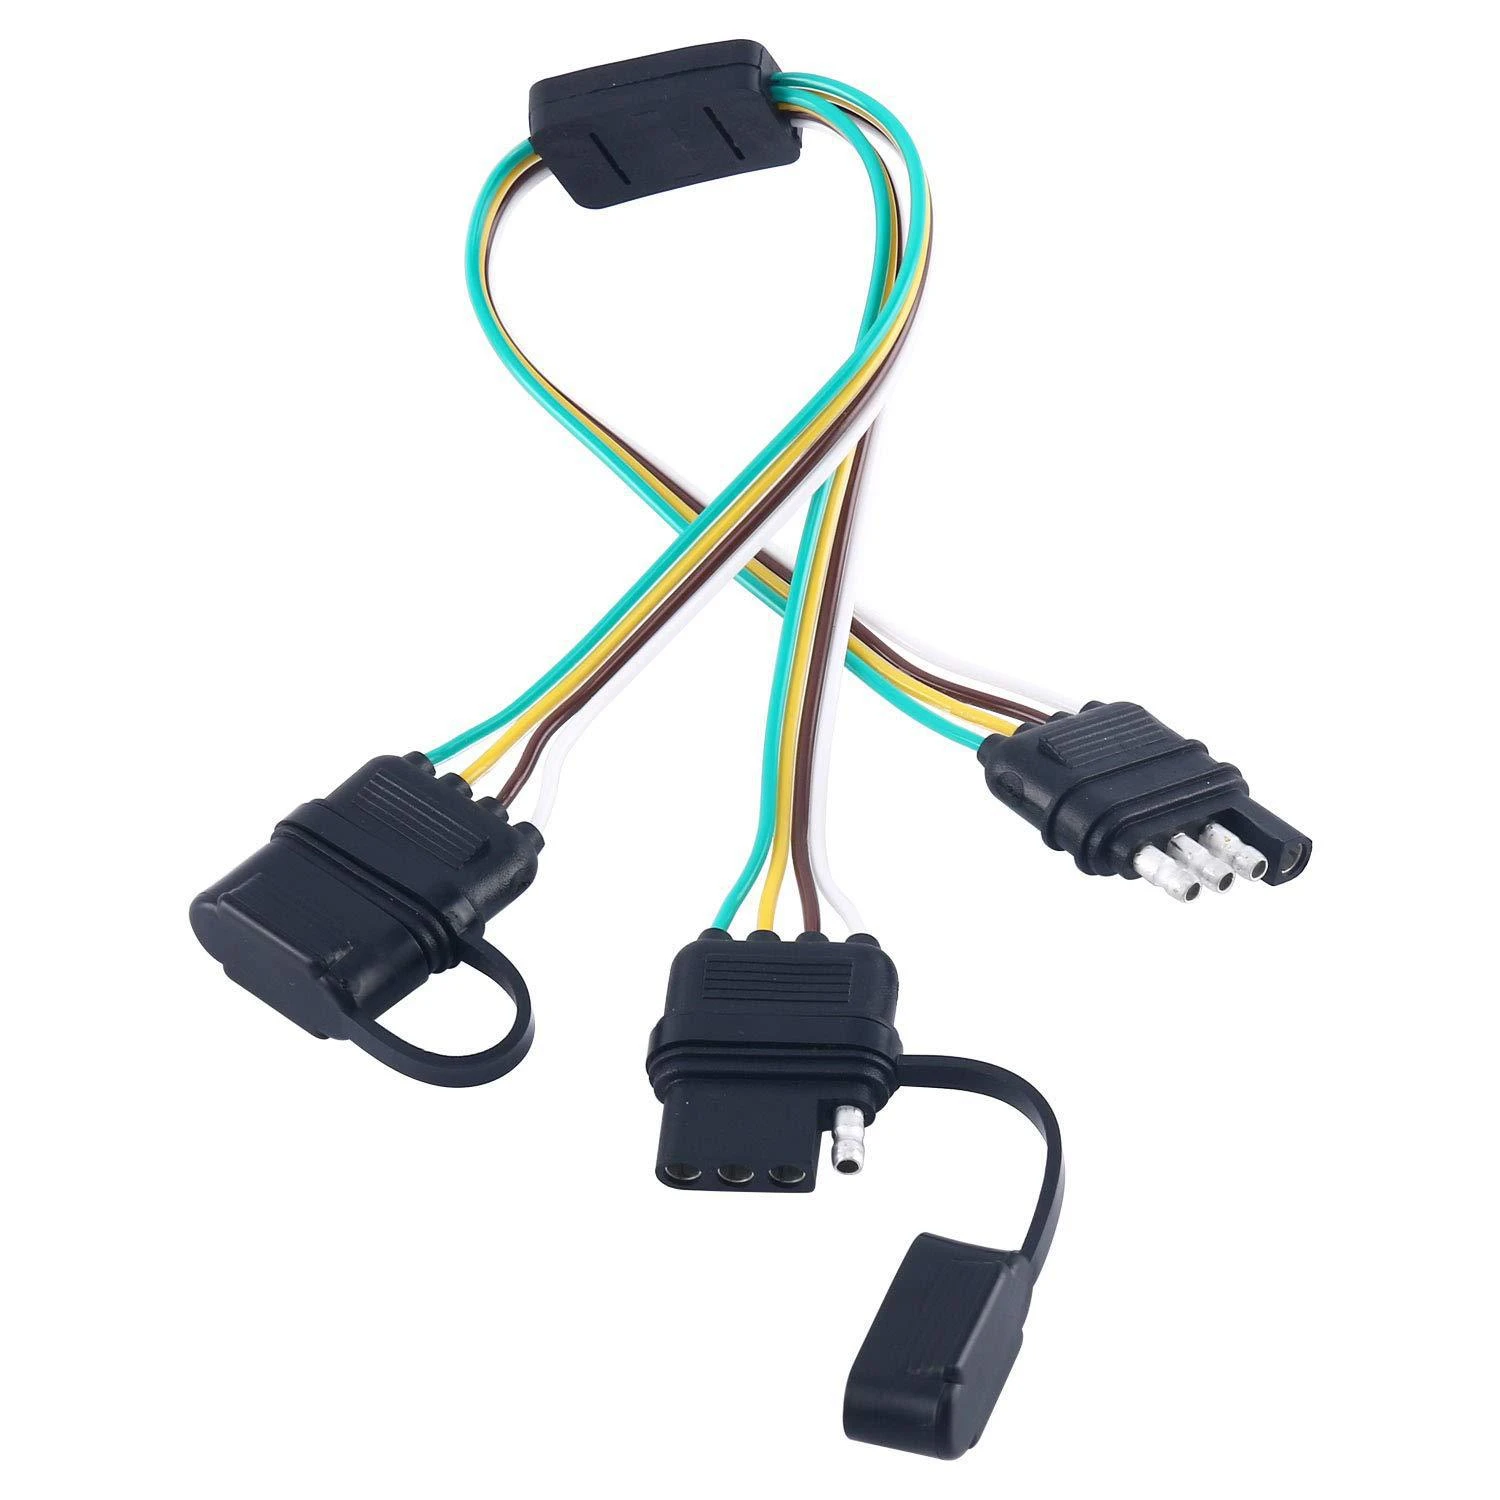 OEM ODM Auto Trailer Wire Extension 4 Pin Plug Flat Y-splitter cord sets Wire Male to Female Trailer Cable harness